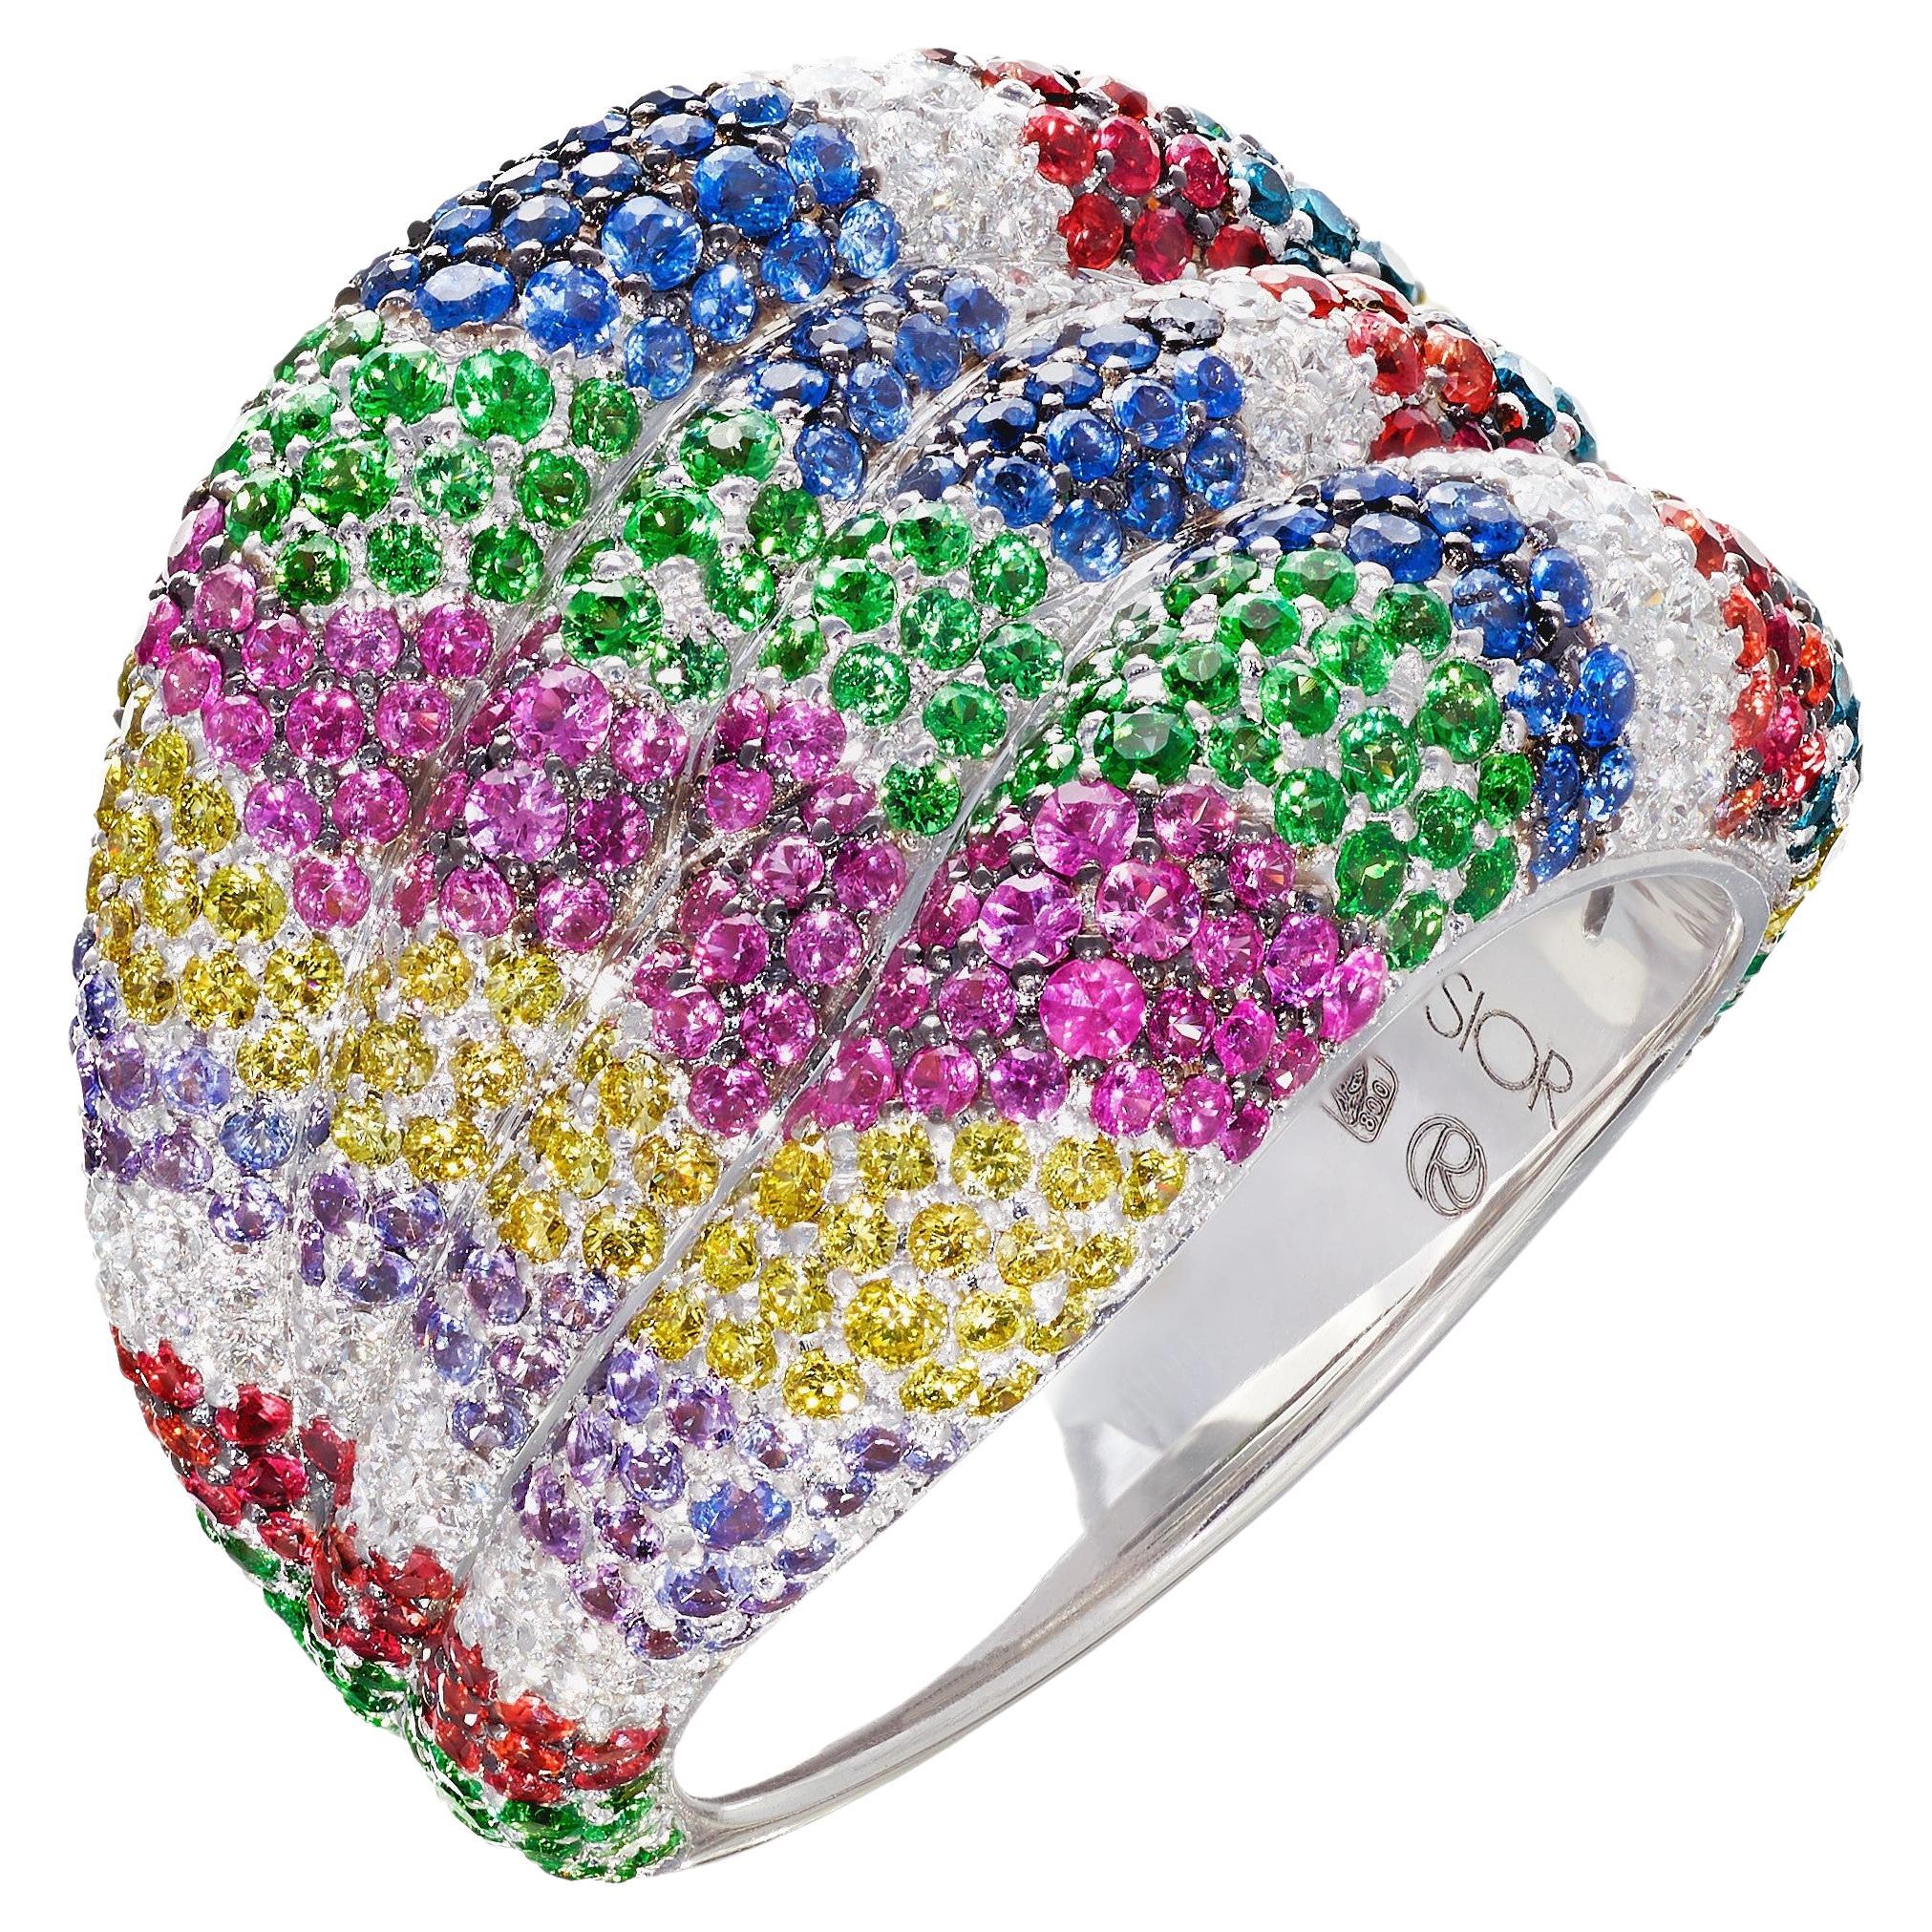 Rosior one-off Diamond, Emerald and Sapphire White Gold Cocktail Ring